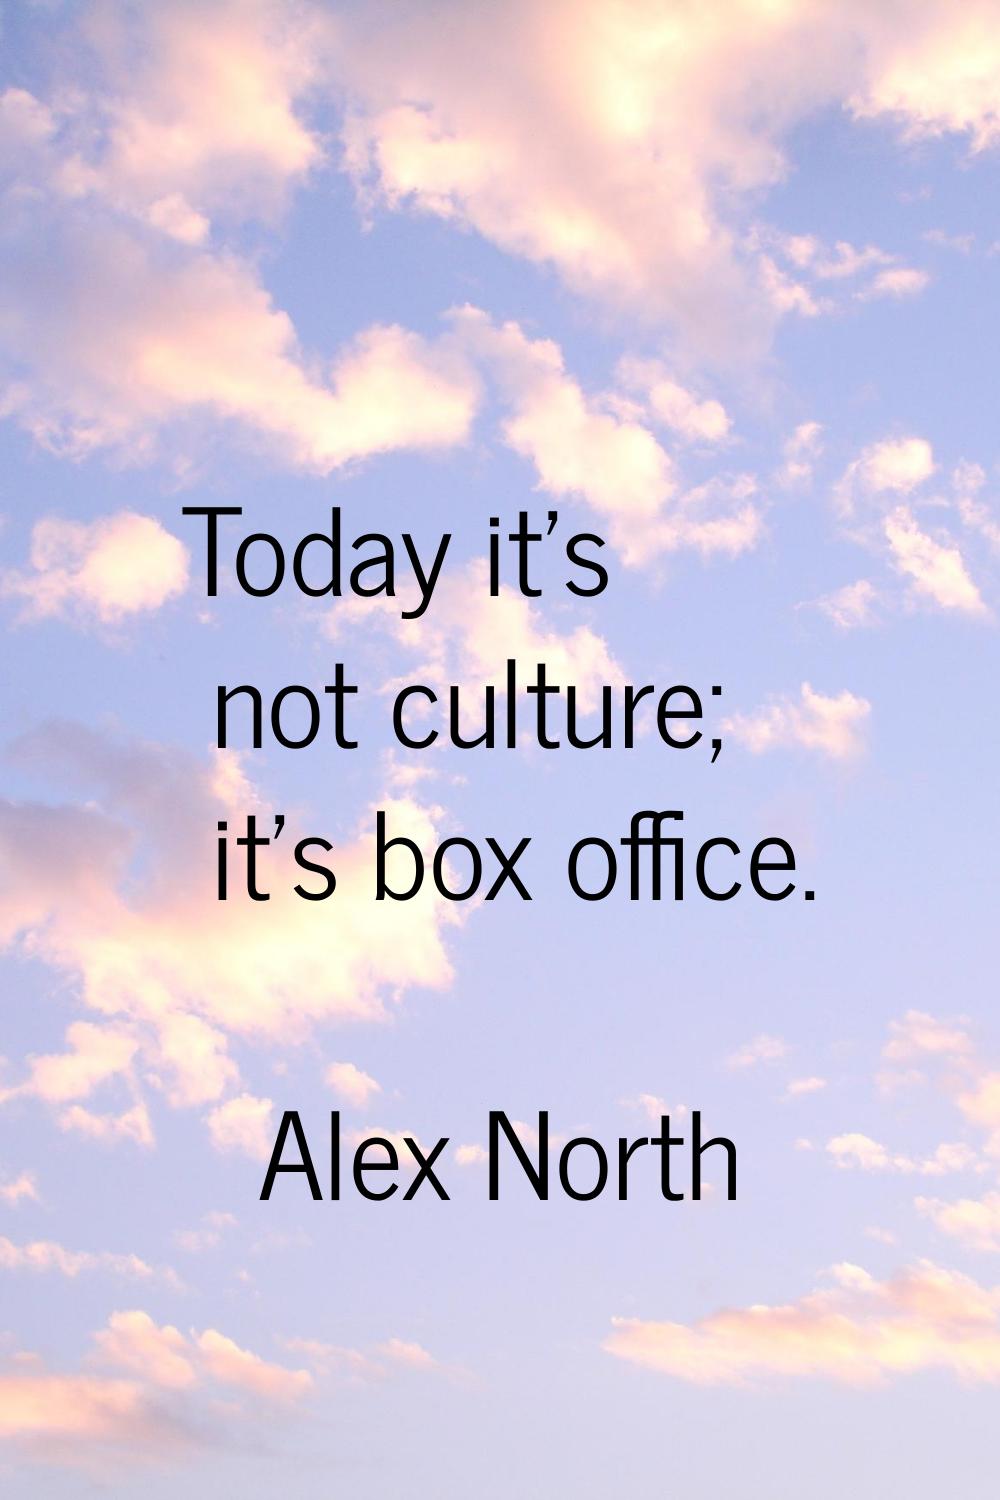 Today it's not culture; it's box office.